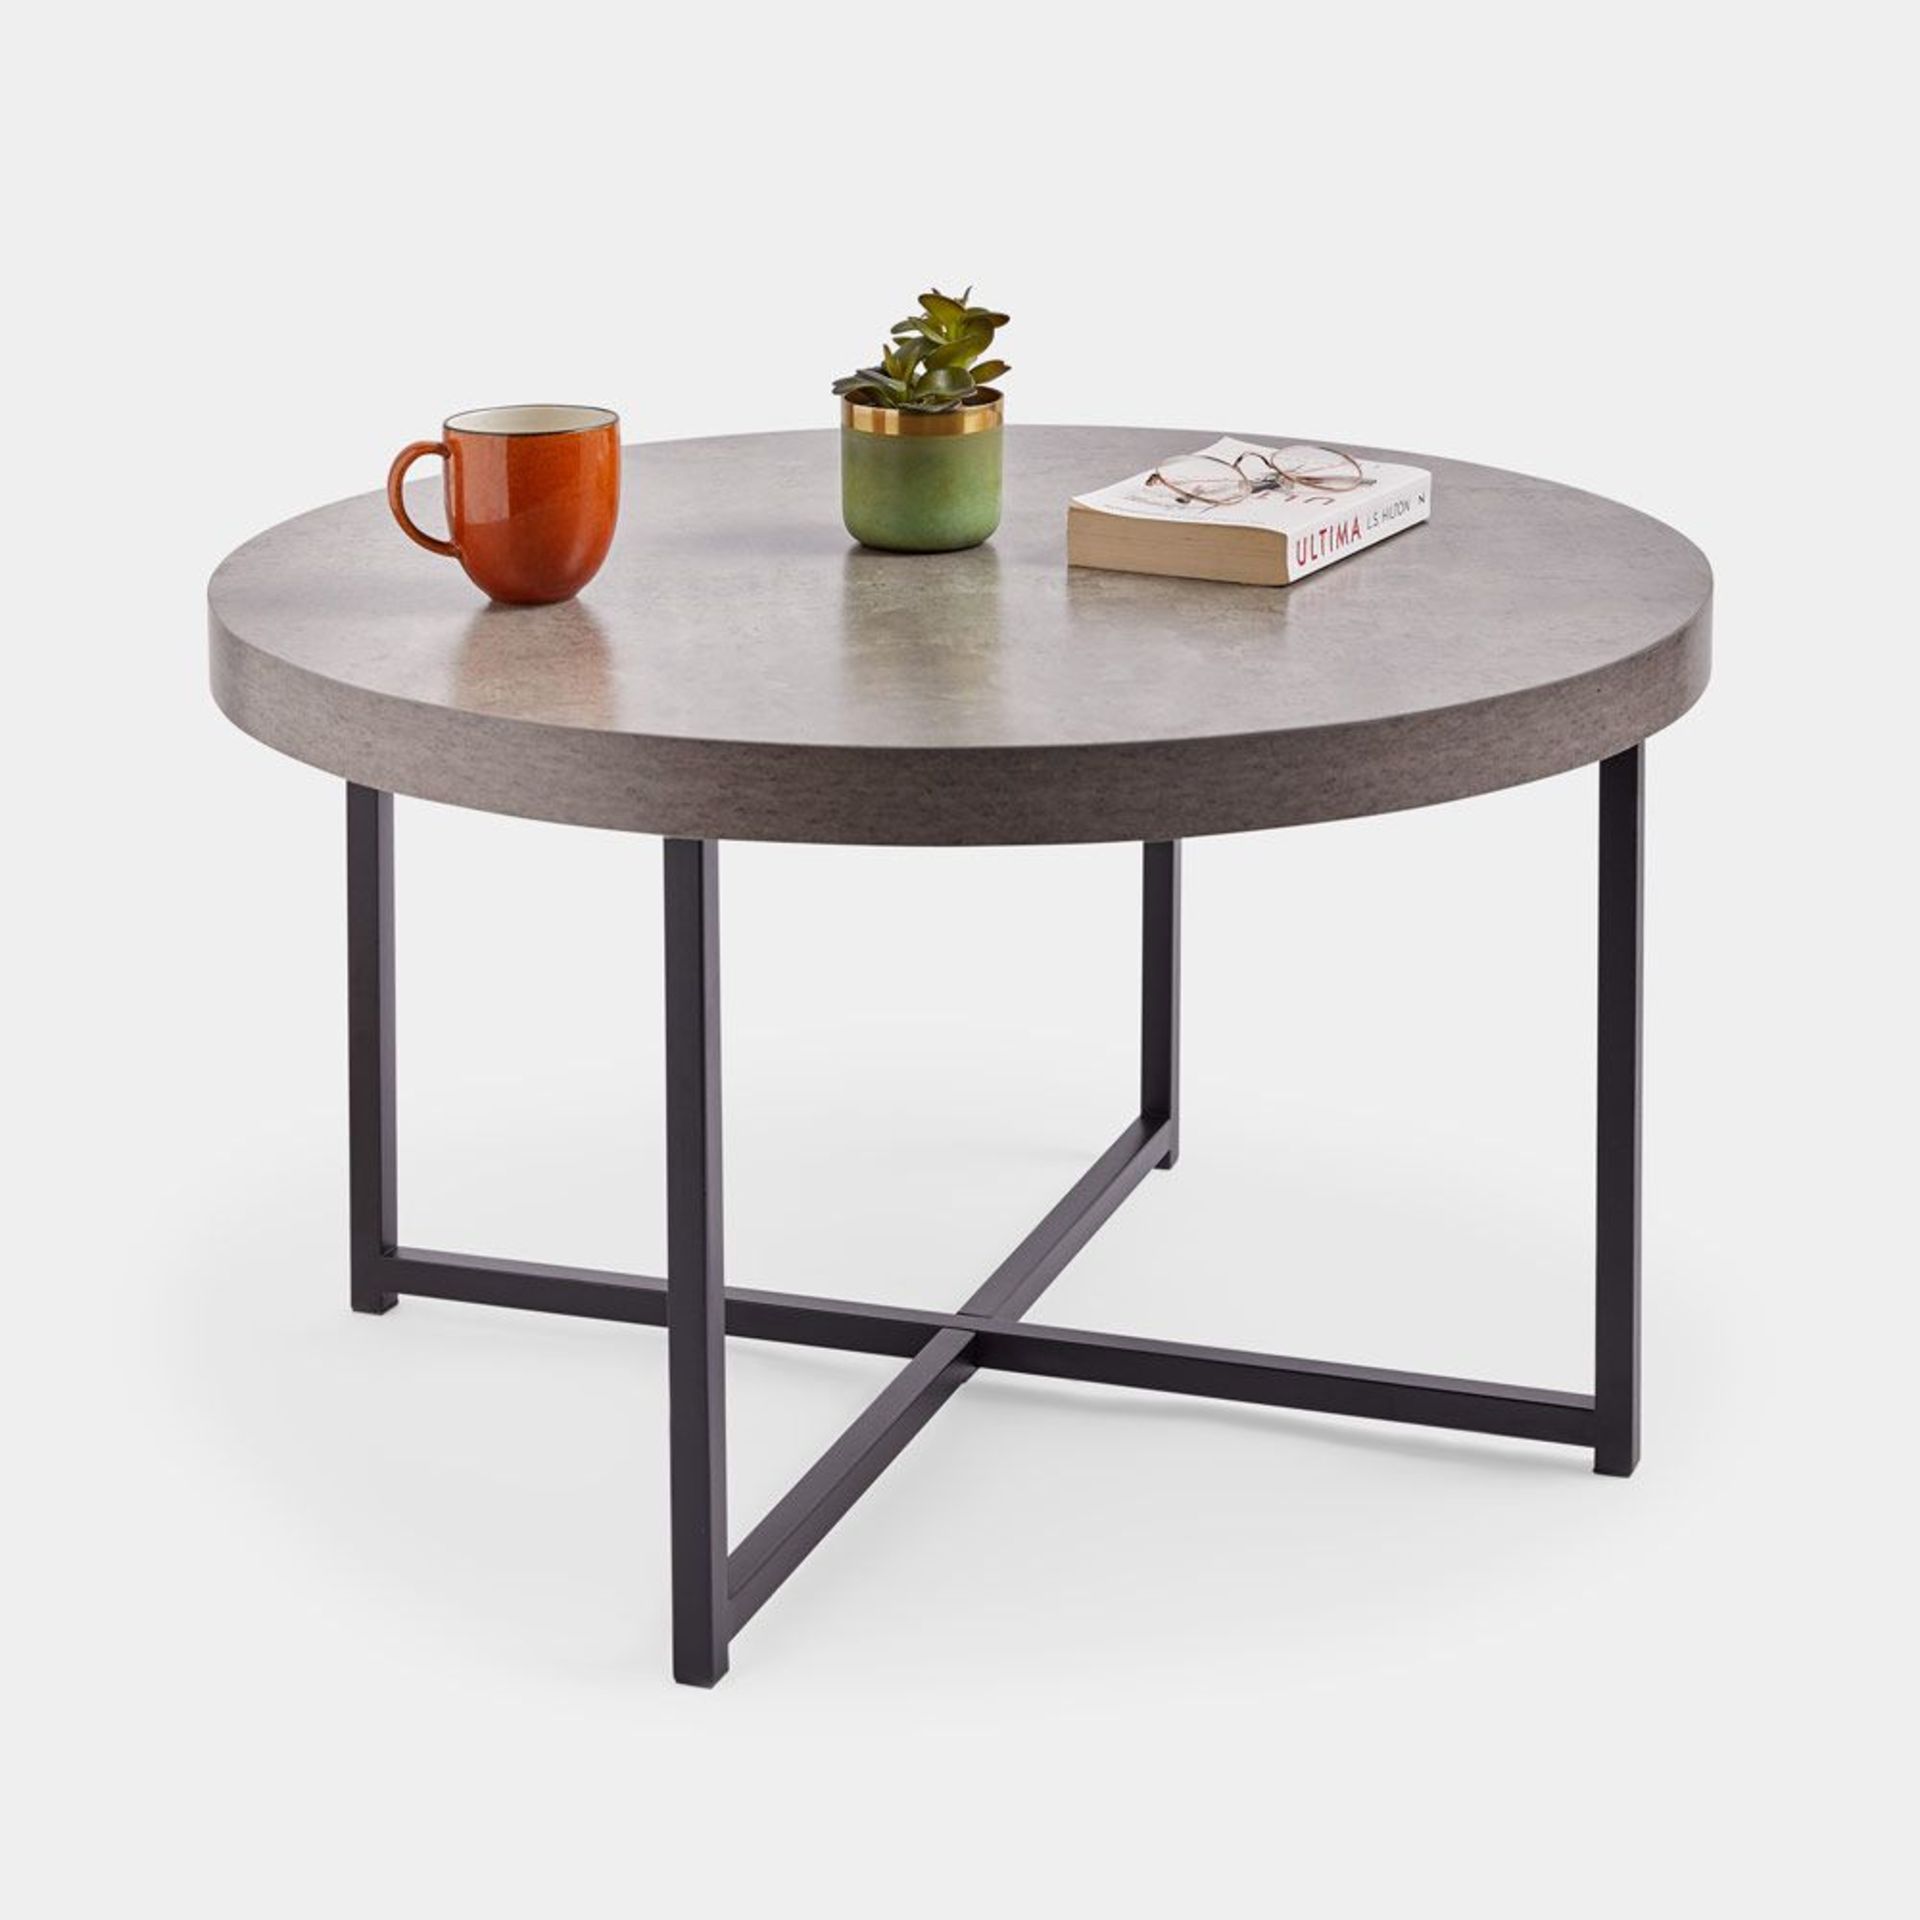 Concrete Effect Coffee Table. - ER42. Industrial, urban style with lightweight construction – this